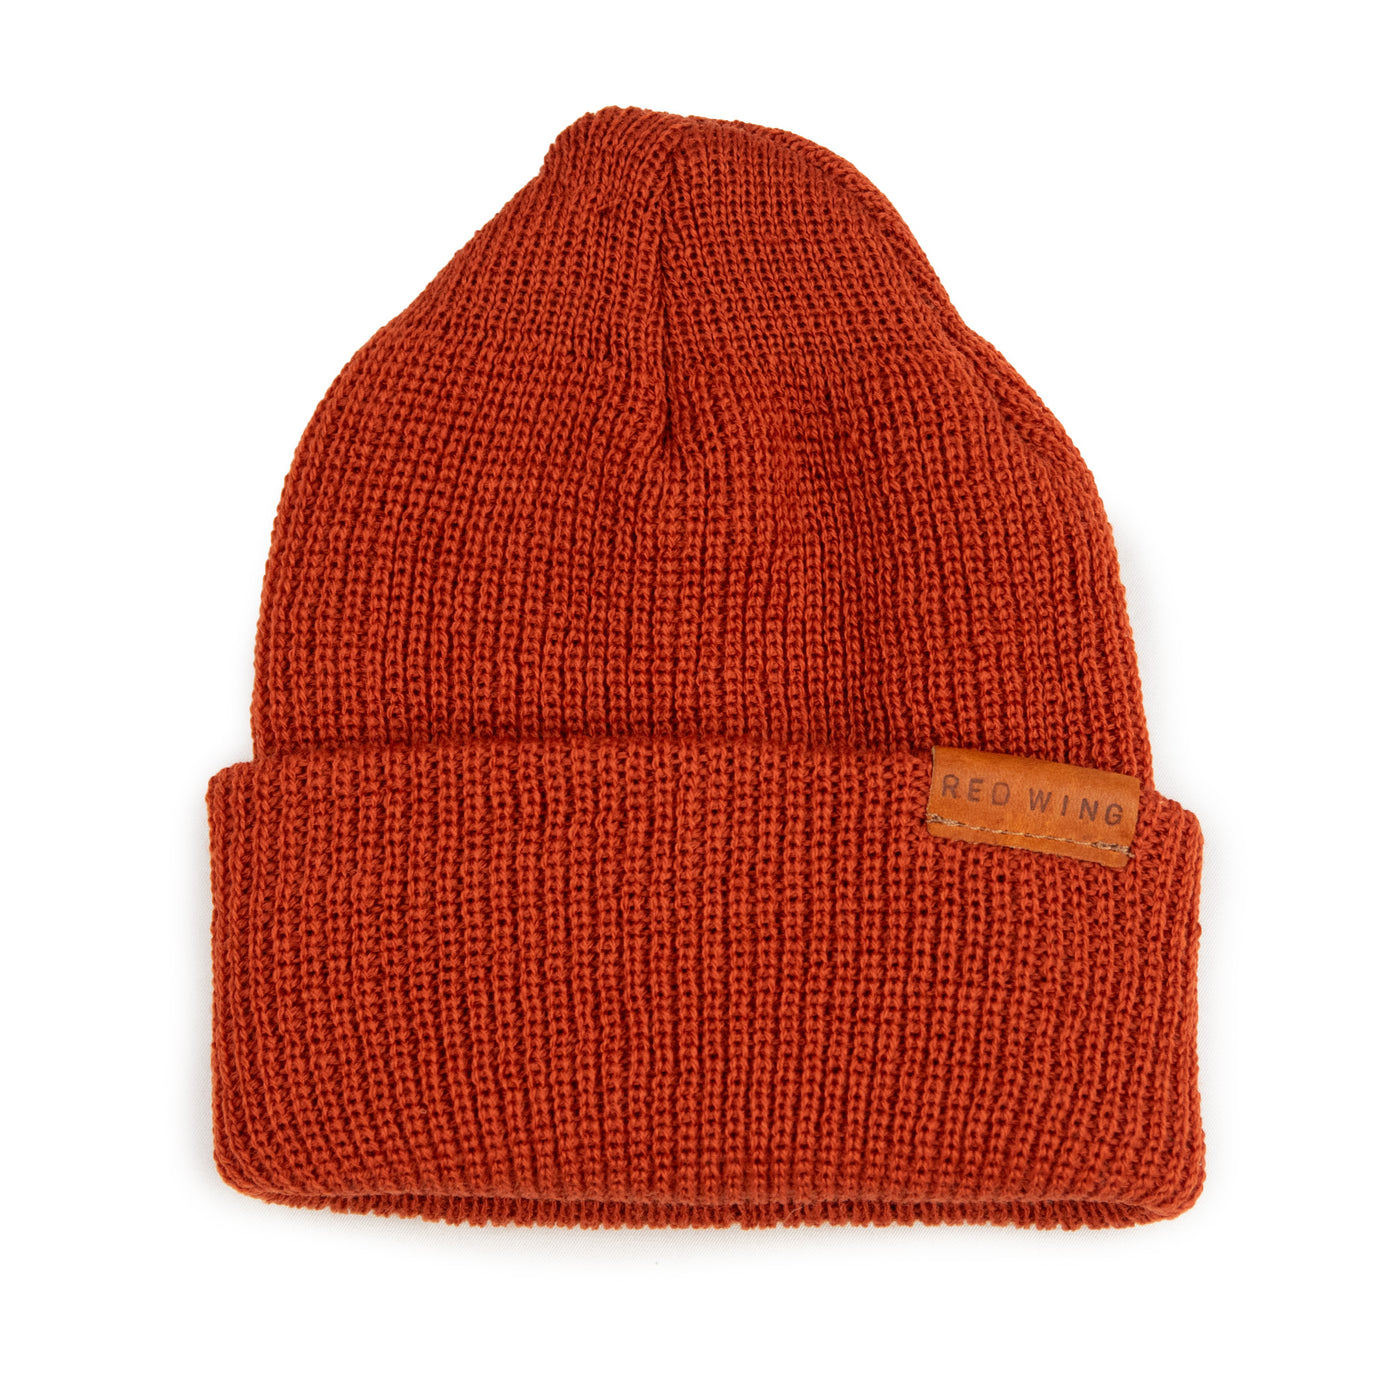 Red Wing 97497 Merino Wool Knit Beanie Rust Front